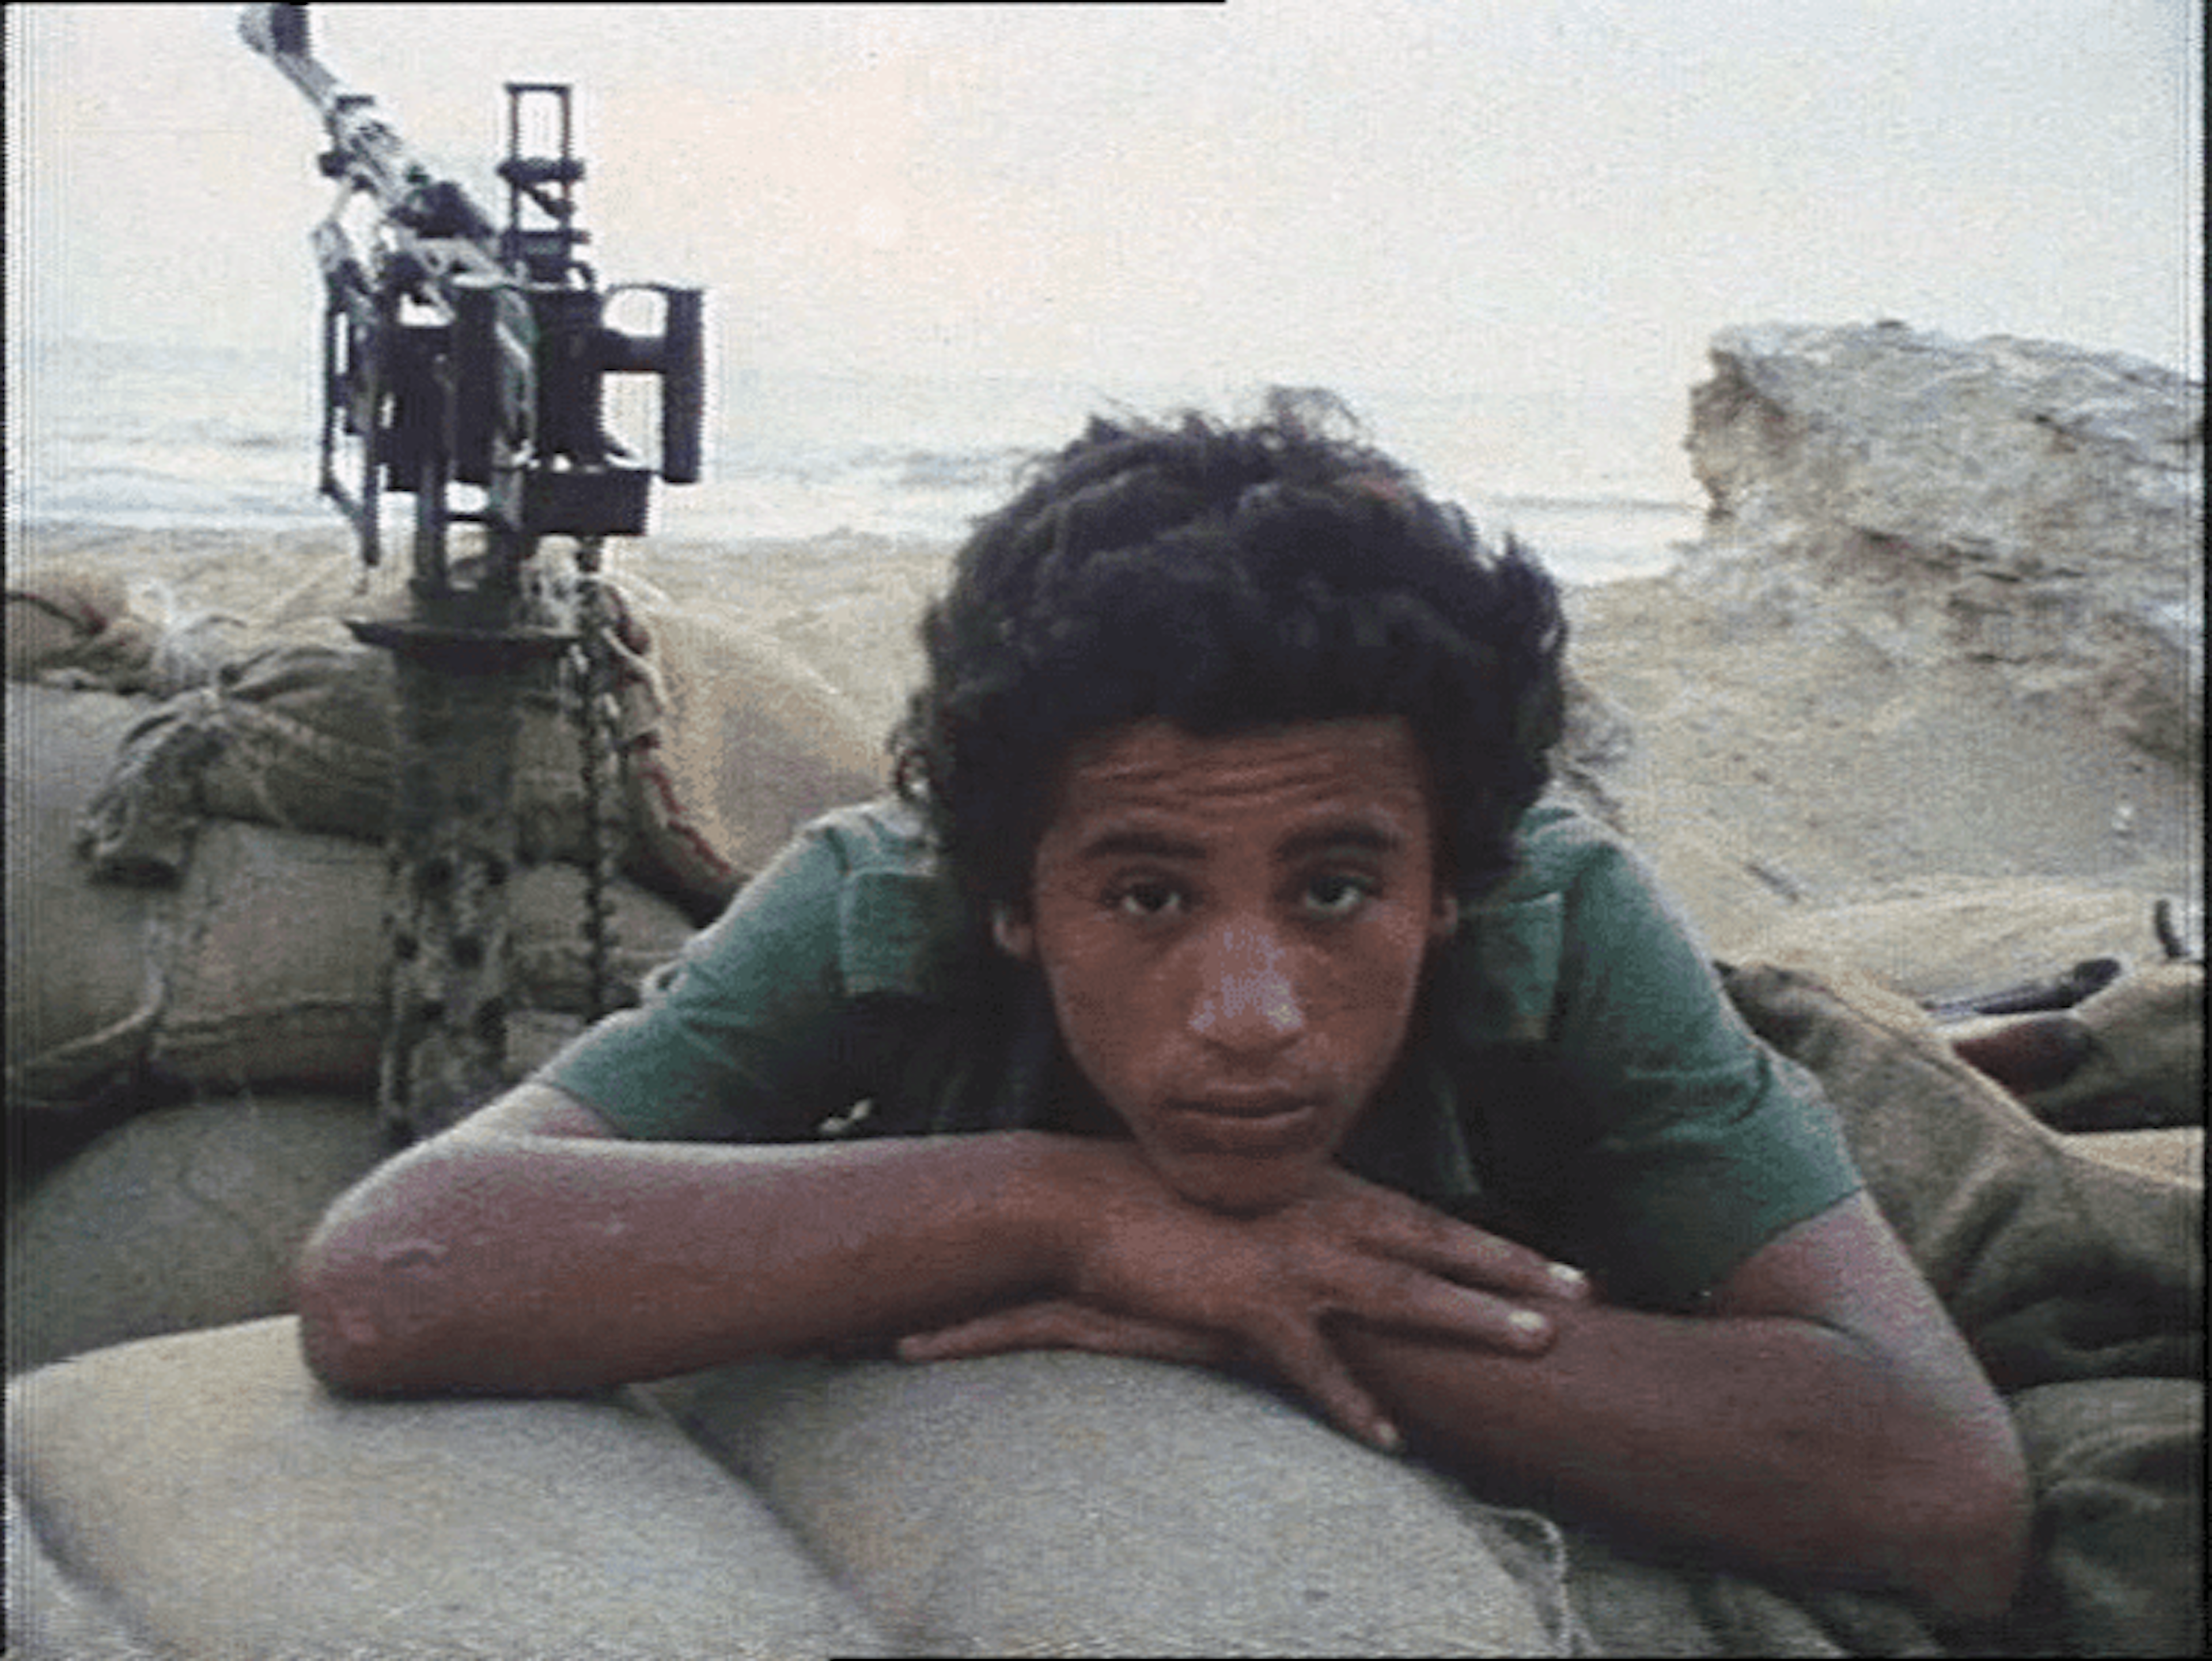 A dark-skinned man gazes at the camera, his chin resting on his hands resting atop sandbags. He wears a short sleeved green shirt. Behind him is military equipment facing the background. There is a shoreline in the background and a hazy sun.